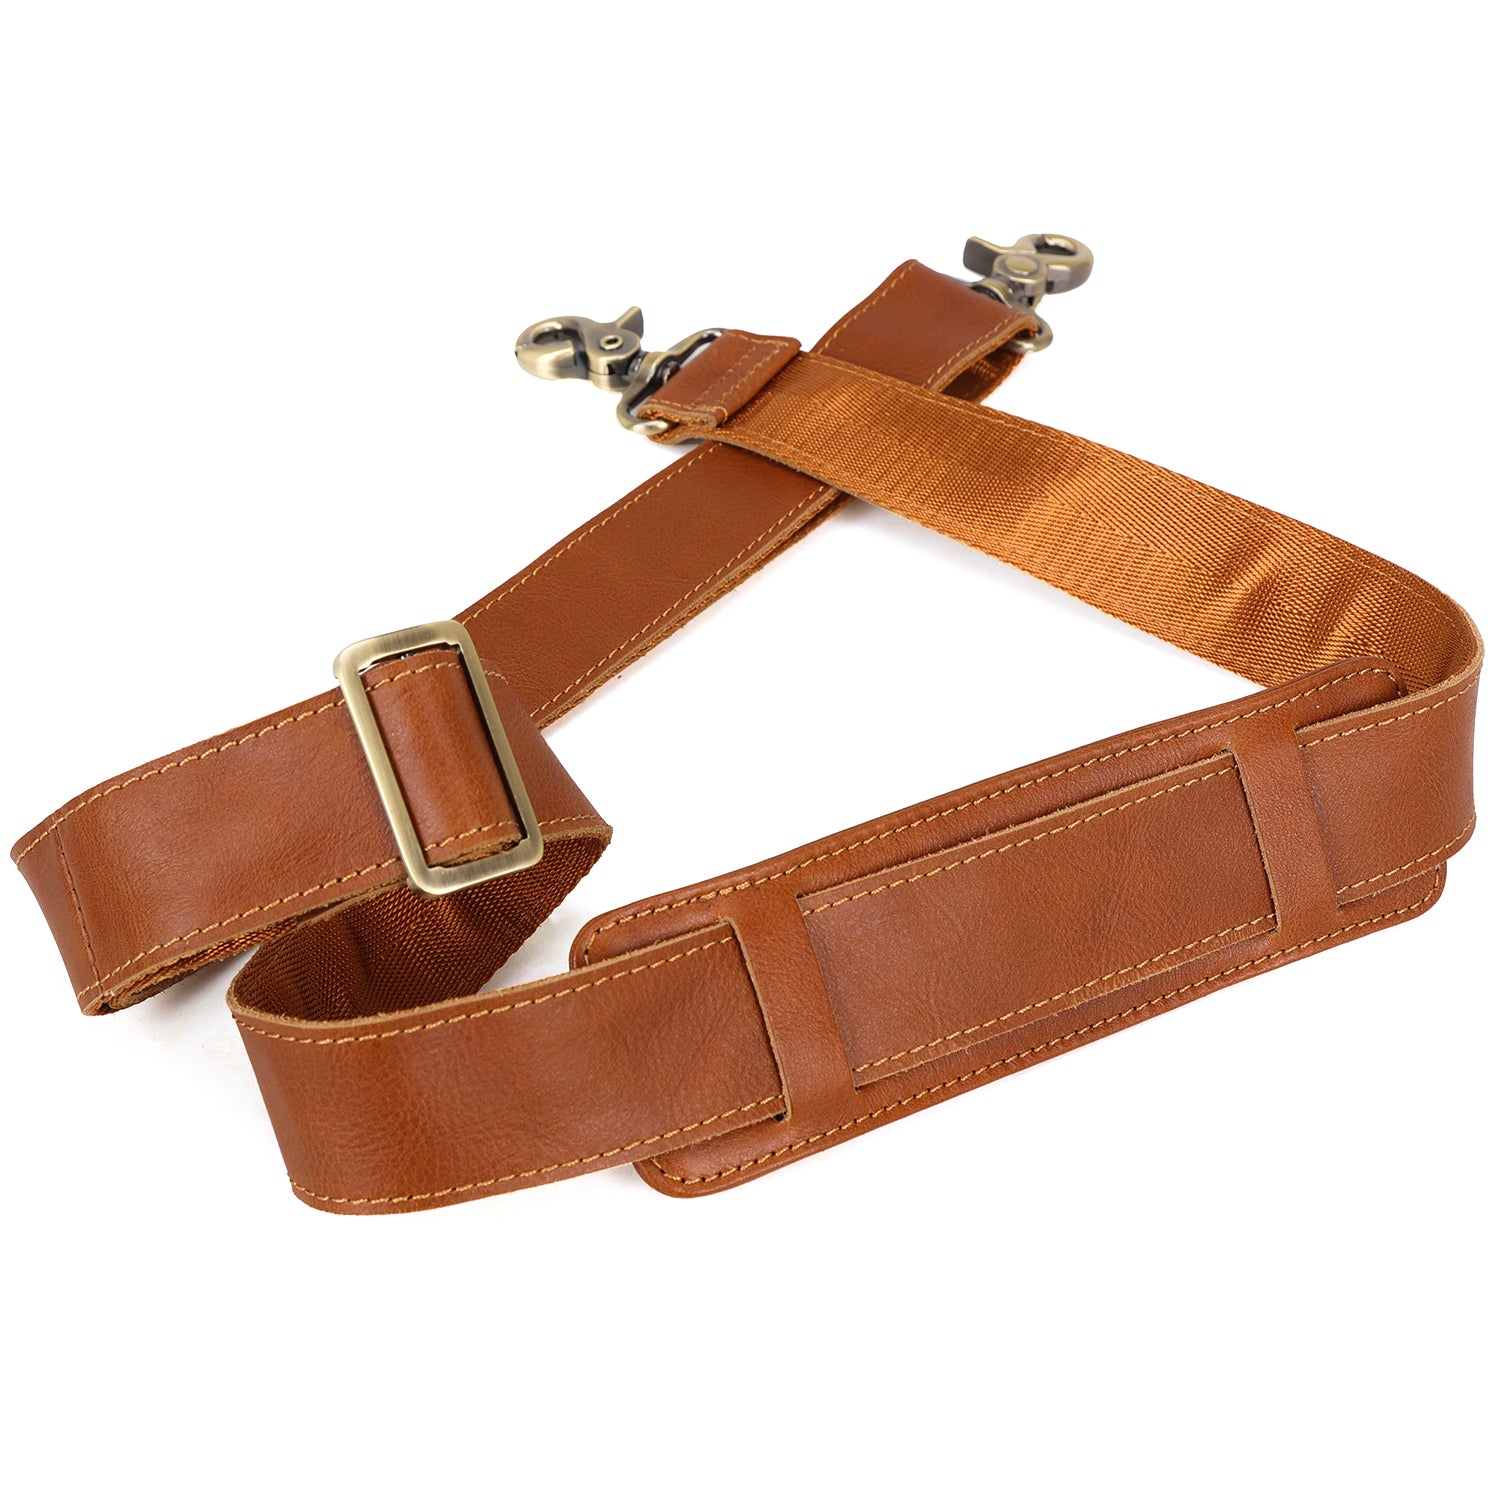 Full Grain Leather Adjustable Replacement Shoulder Strap (Brown)